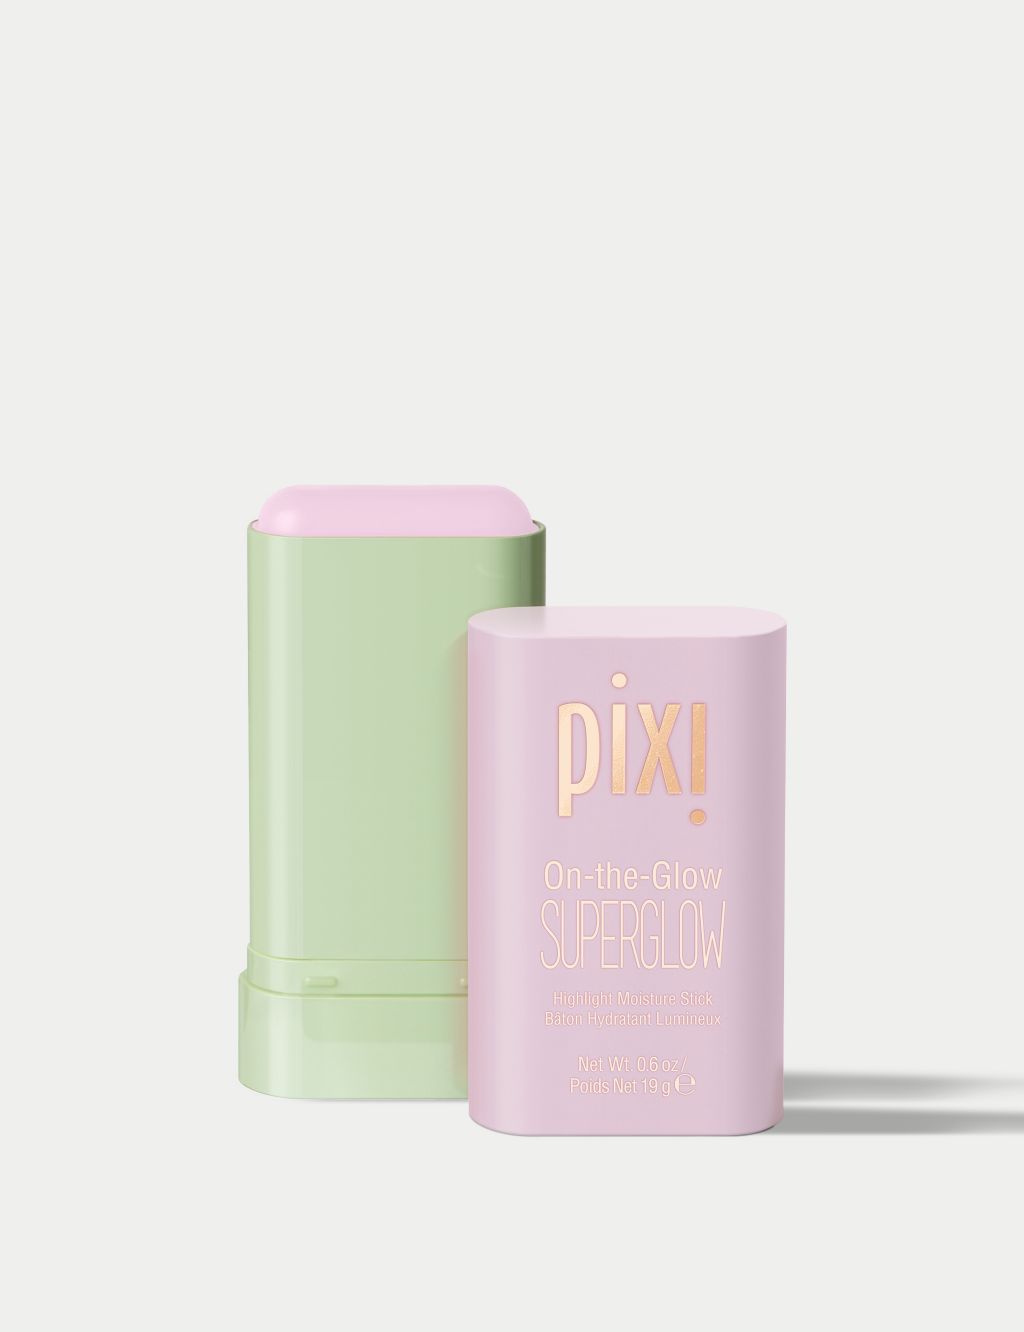 Pixi On-The-Glow Superglow Highlighter 19g 1 of 2